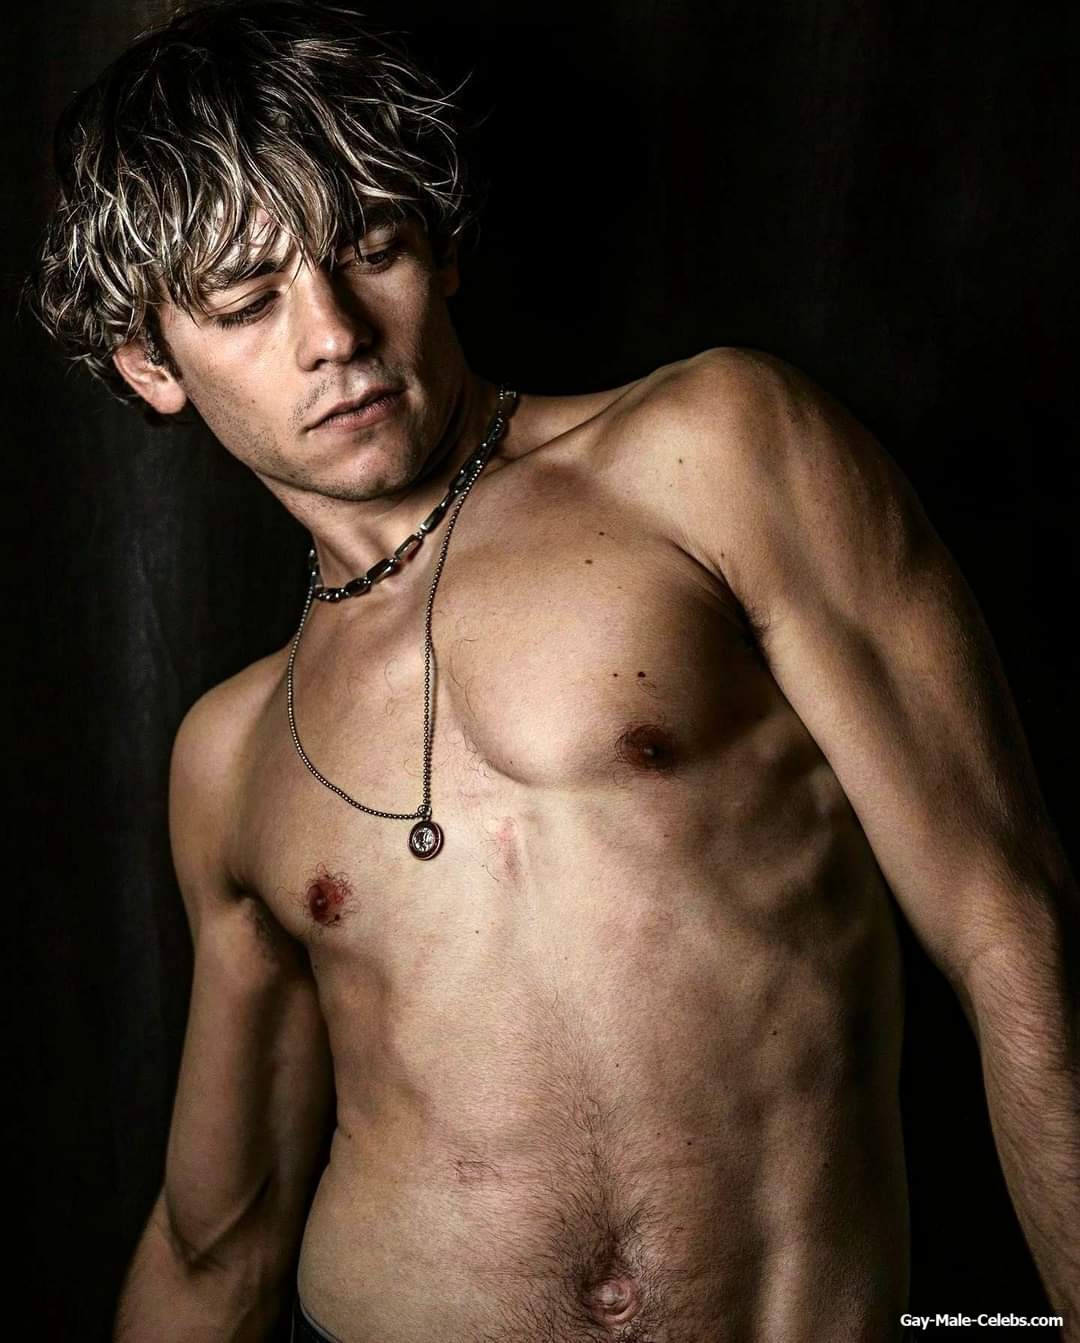 Ross Lynch Shirtless And Sexy Photo-shoot